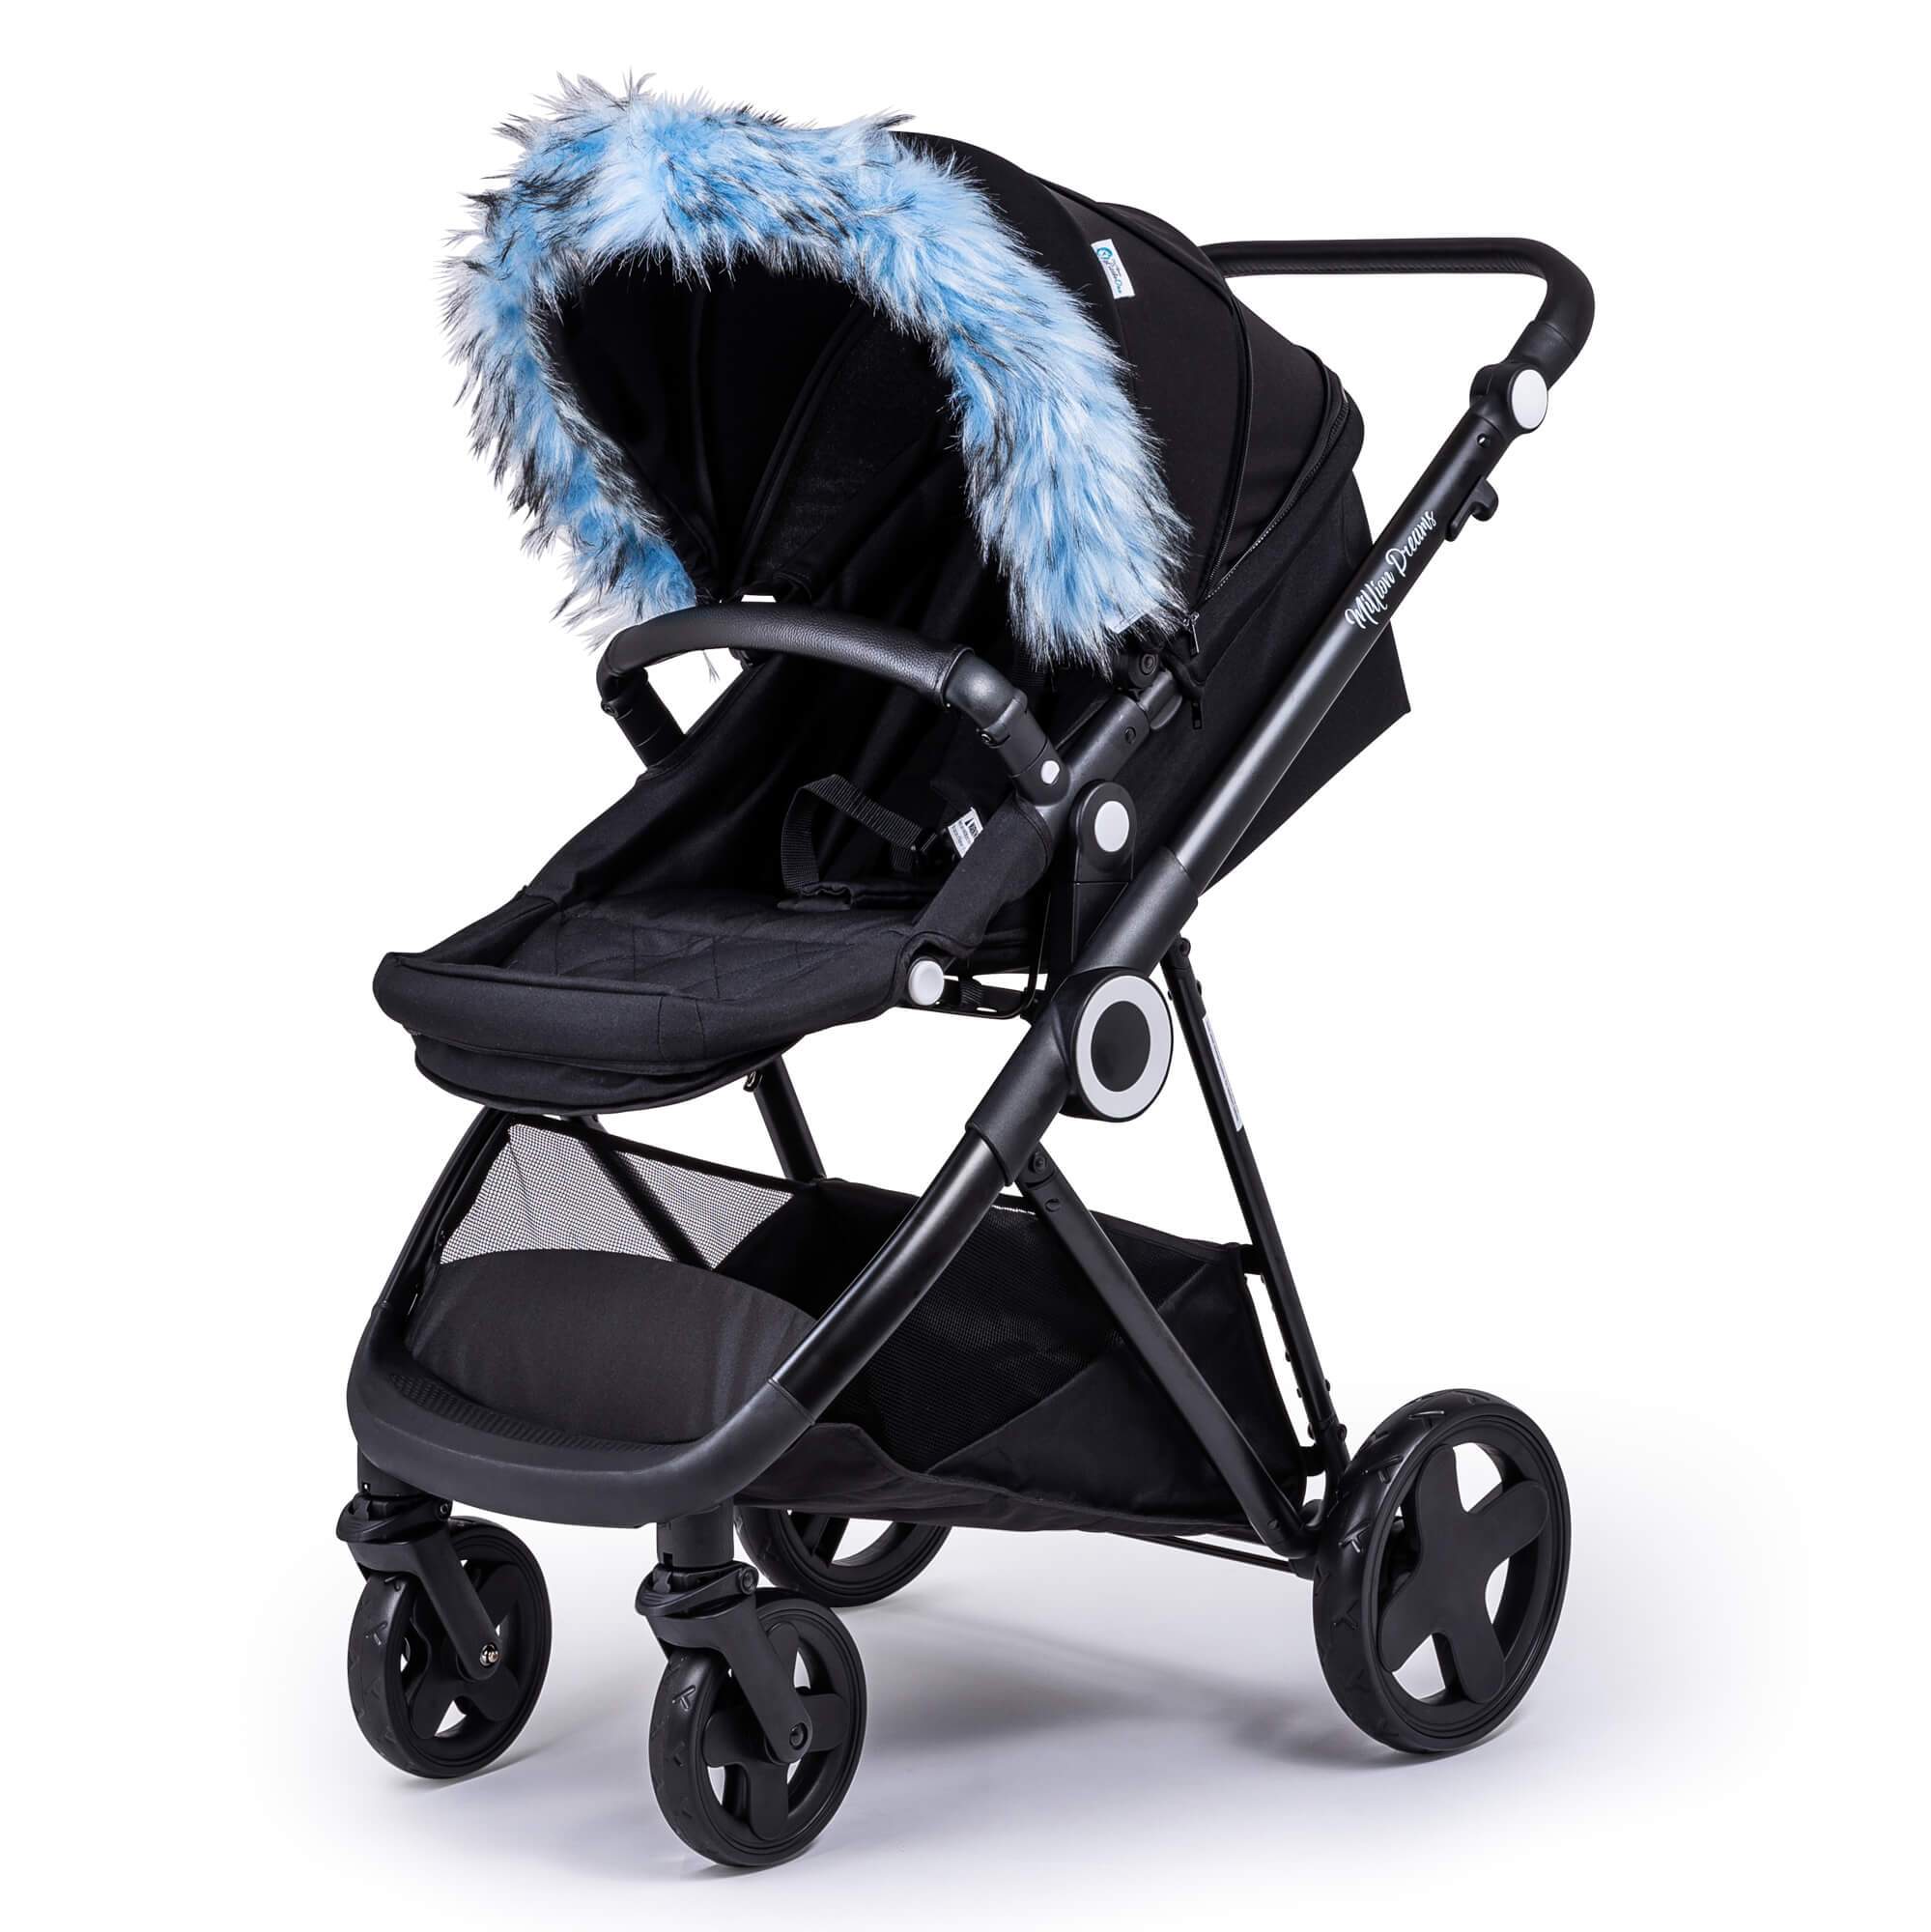 Pram Fur Hood Trim Attachment for Pushchair Compatible with Baby Elegance - Light Blue / Fits All Models | For Your Little One